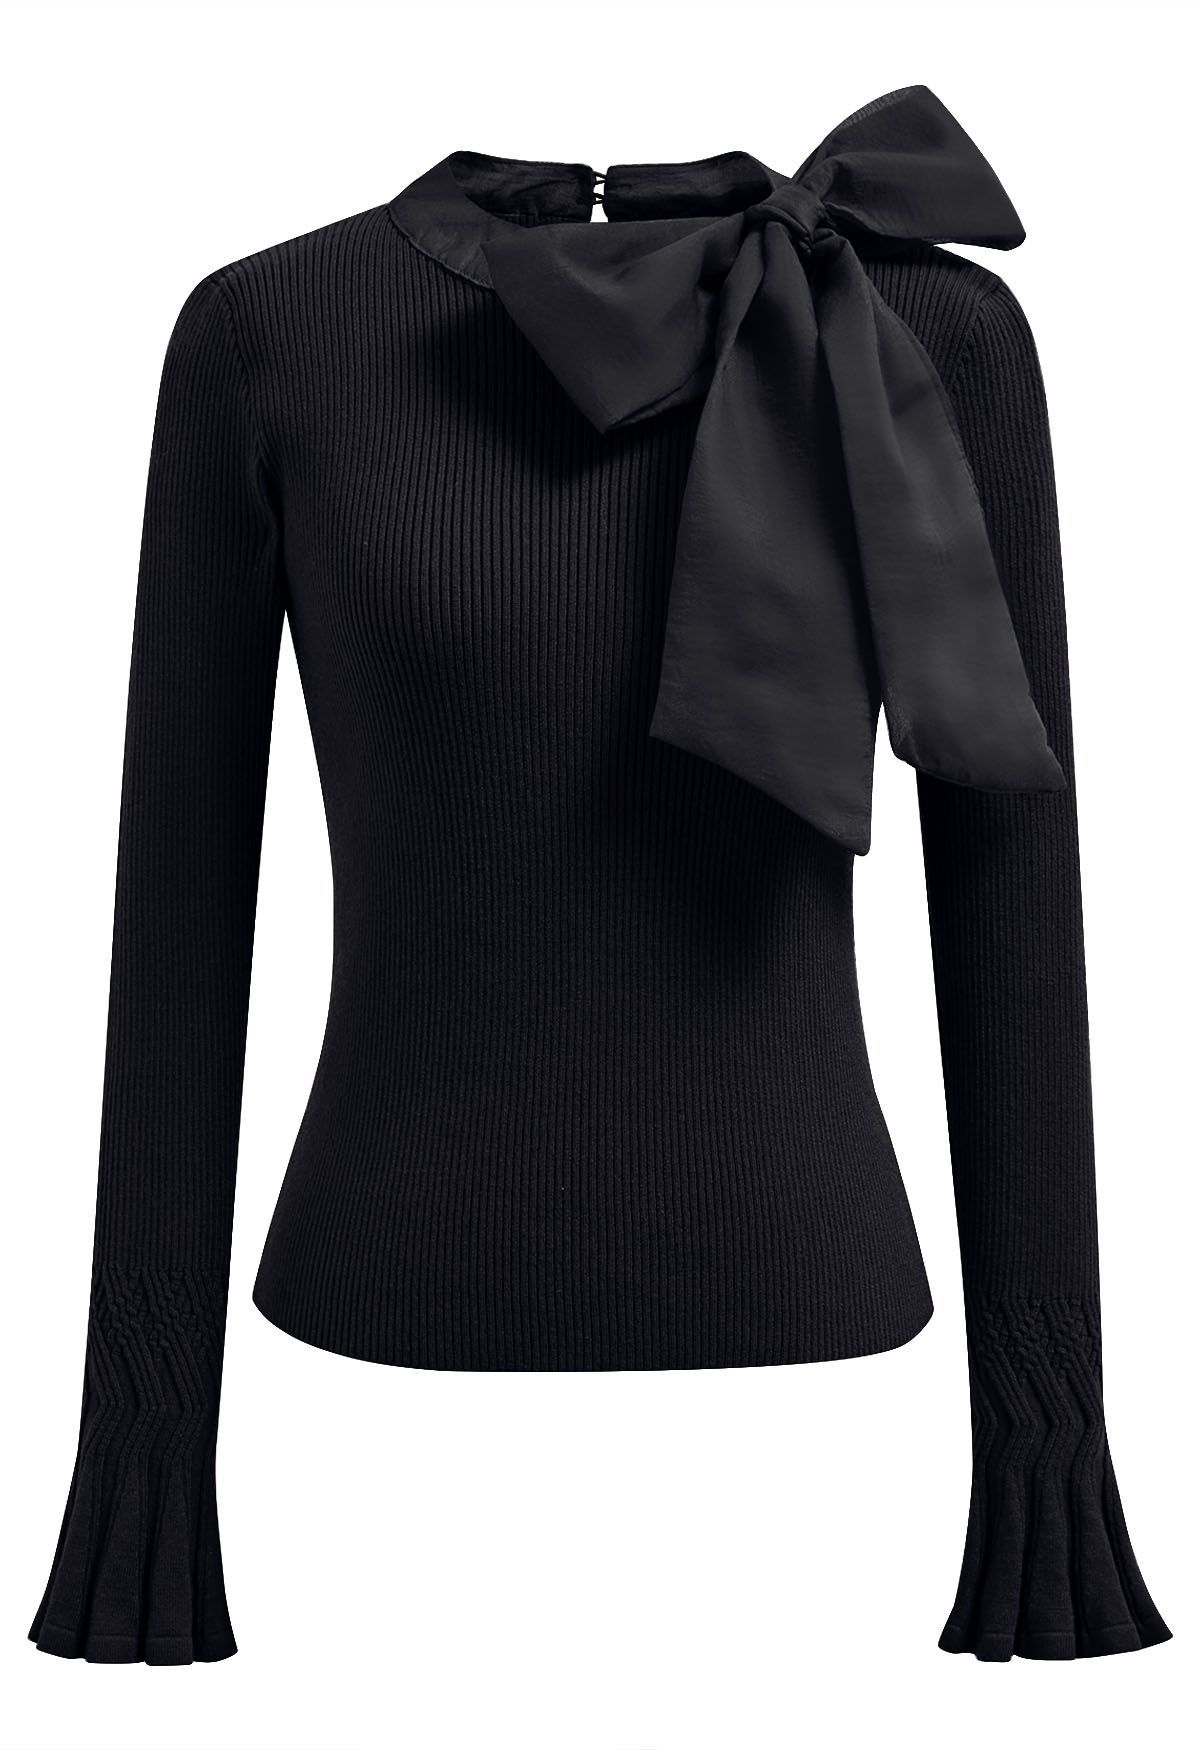 Fancy with Bowknot Knit Top in Black | Chicwish